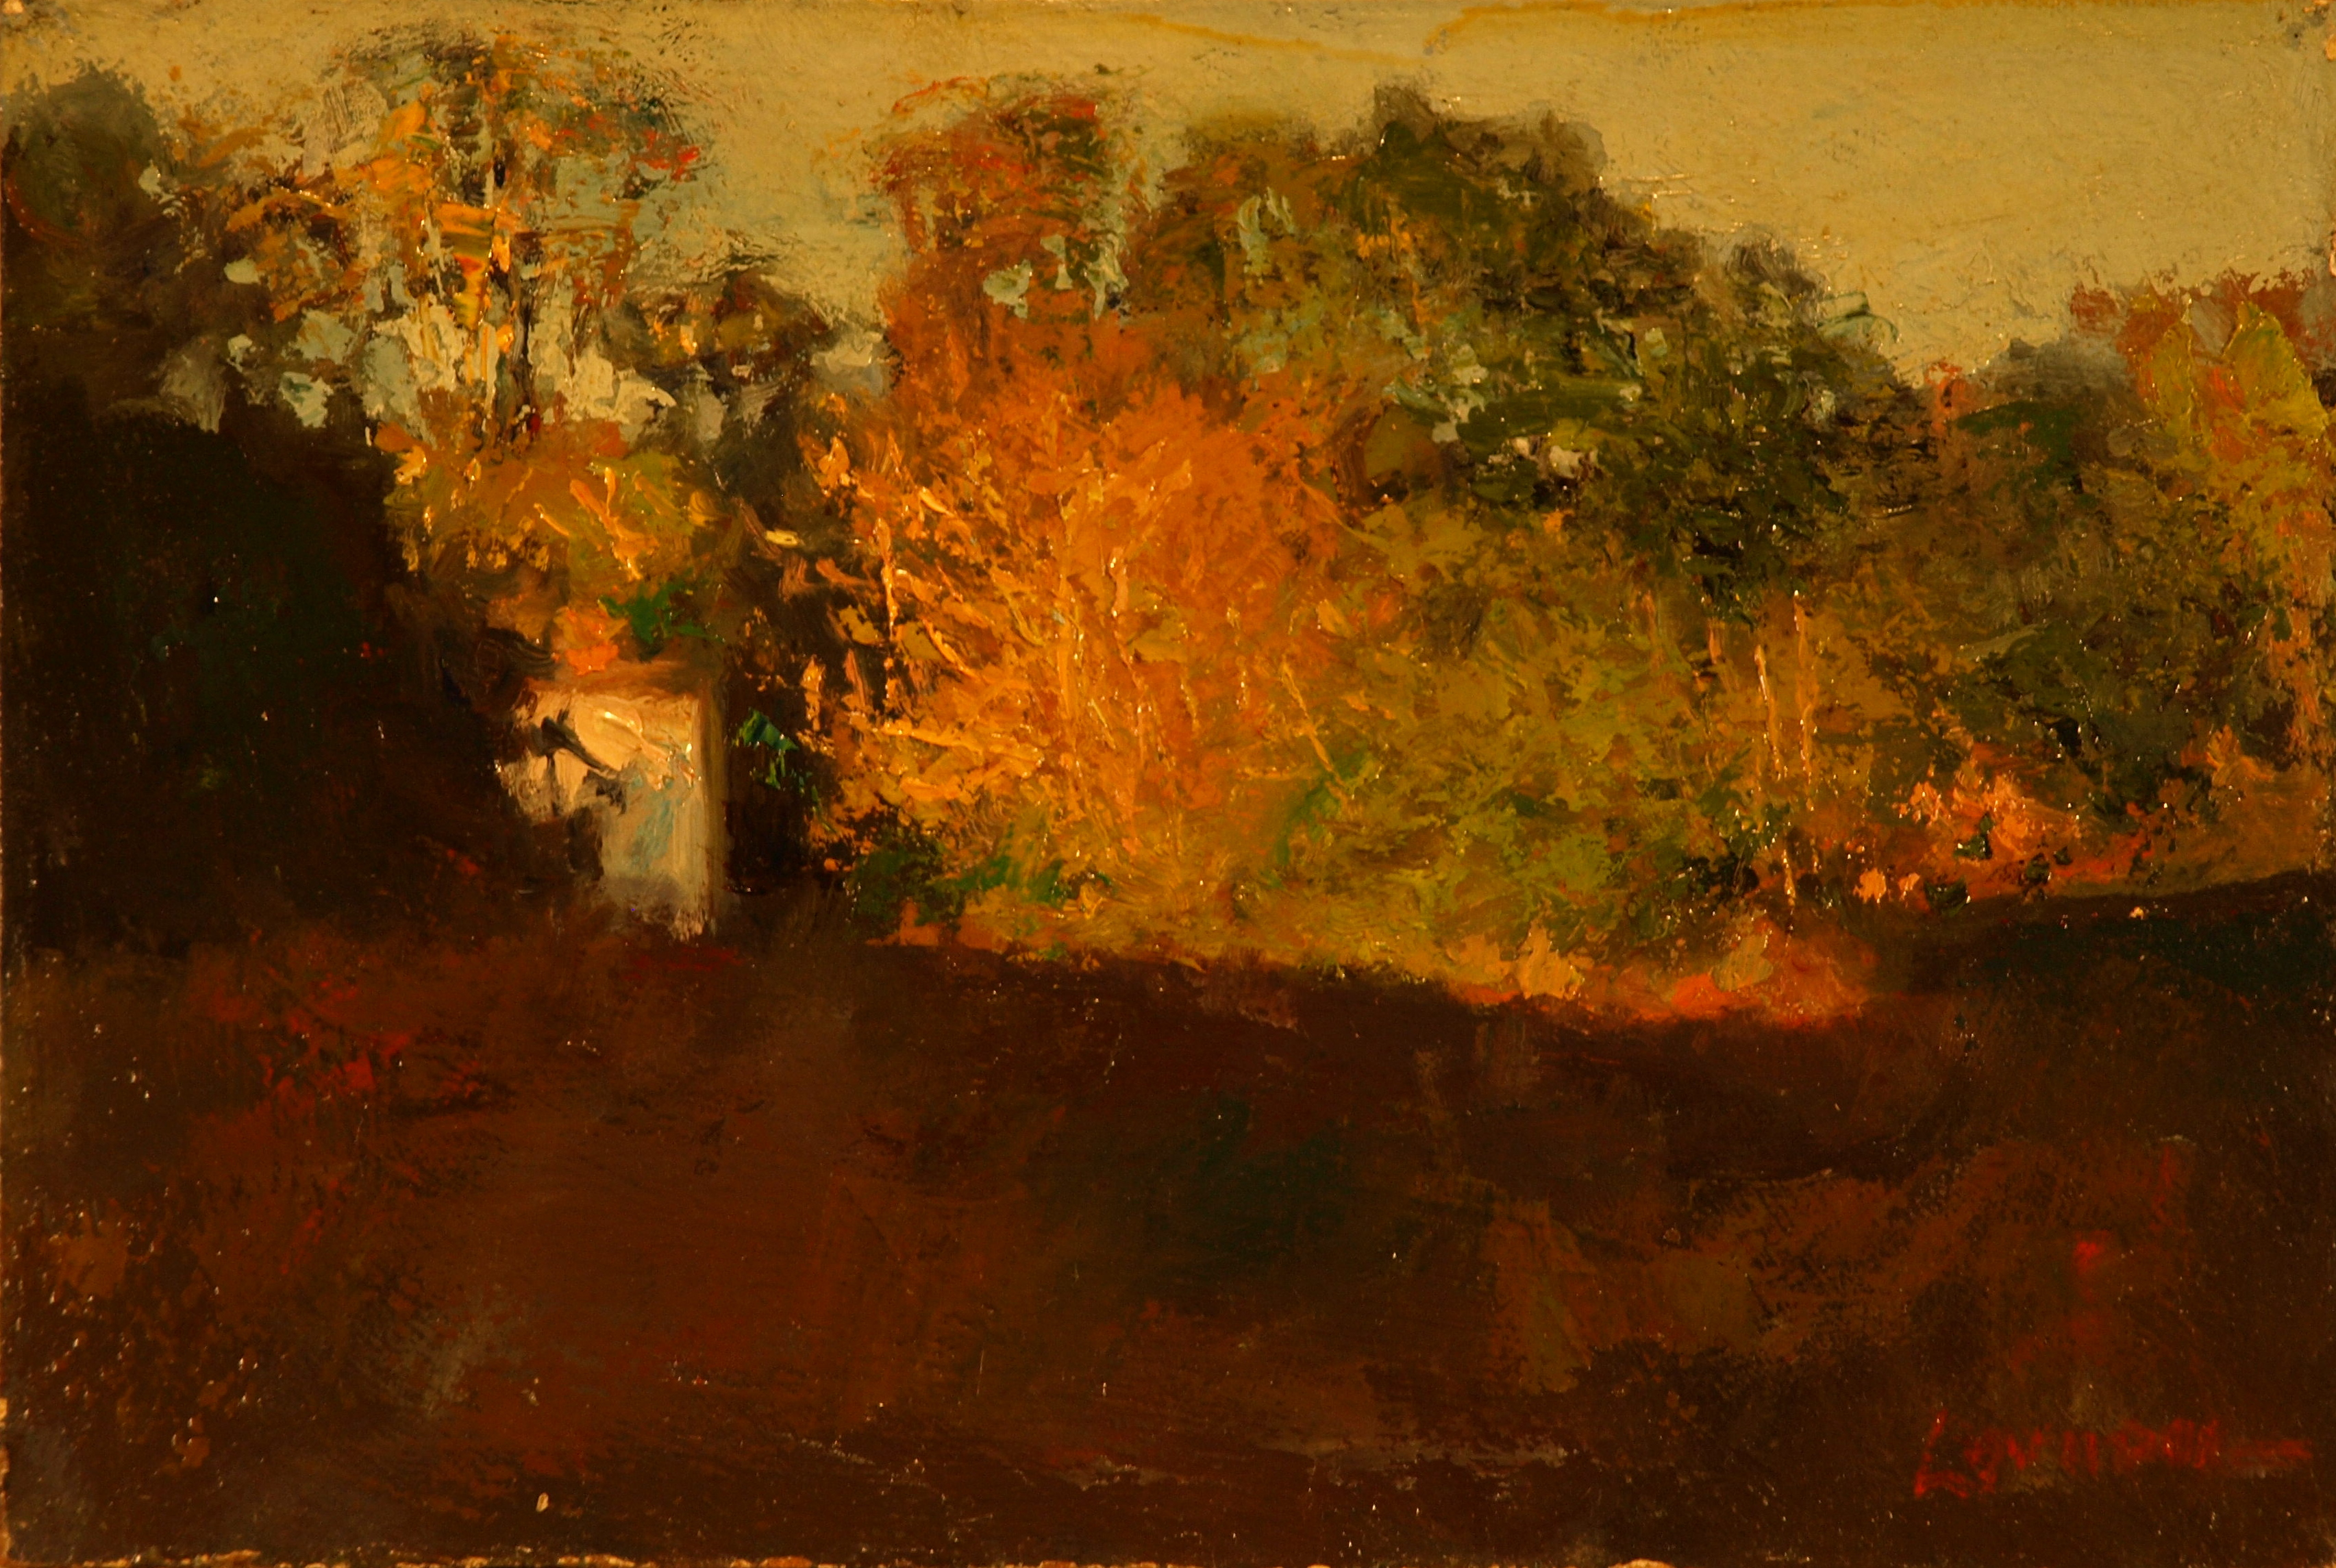 House in Autumn Sunset, Oil on Panel, 8 x 12 Inches, by Bernard Lennon, $400